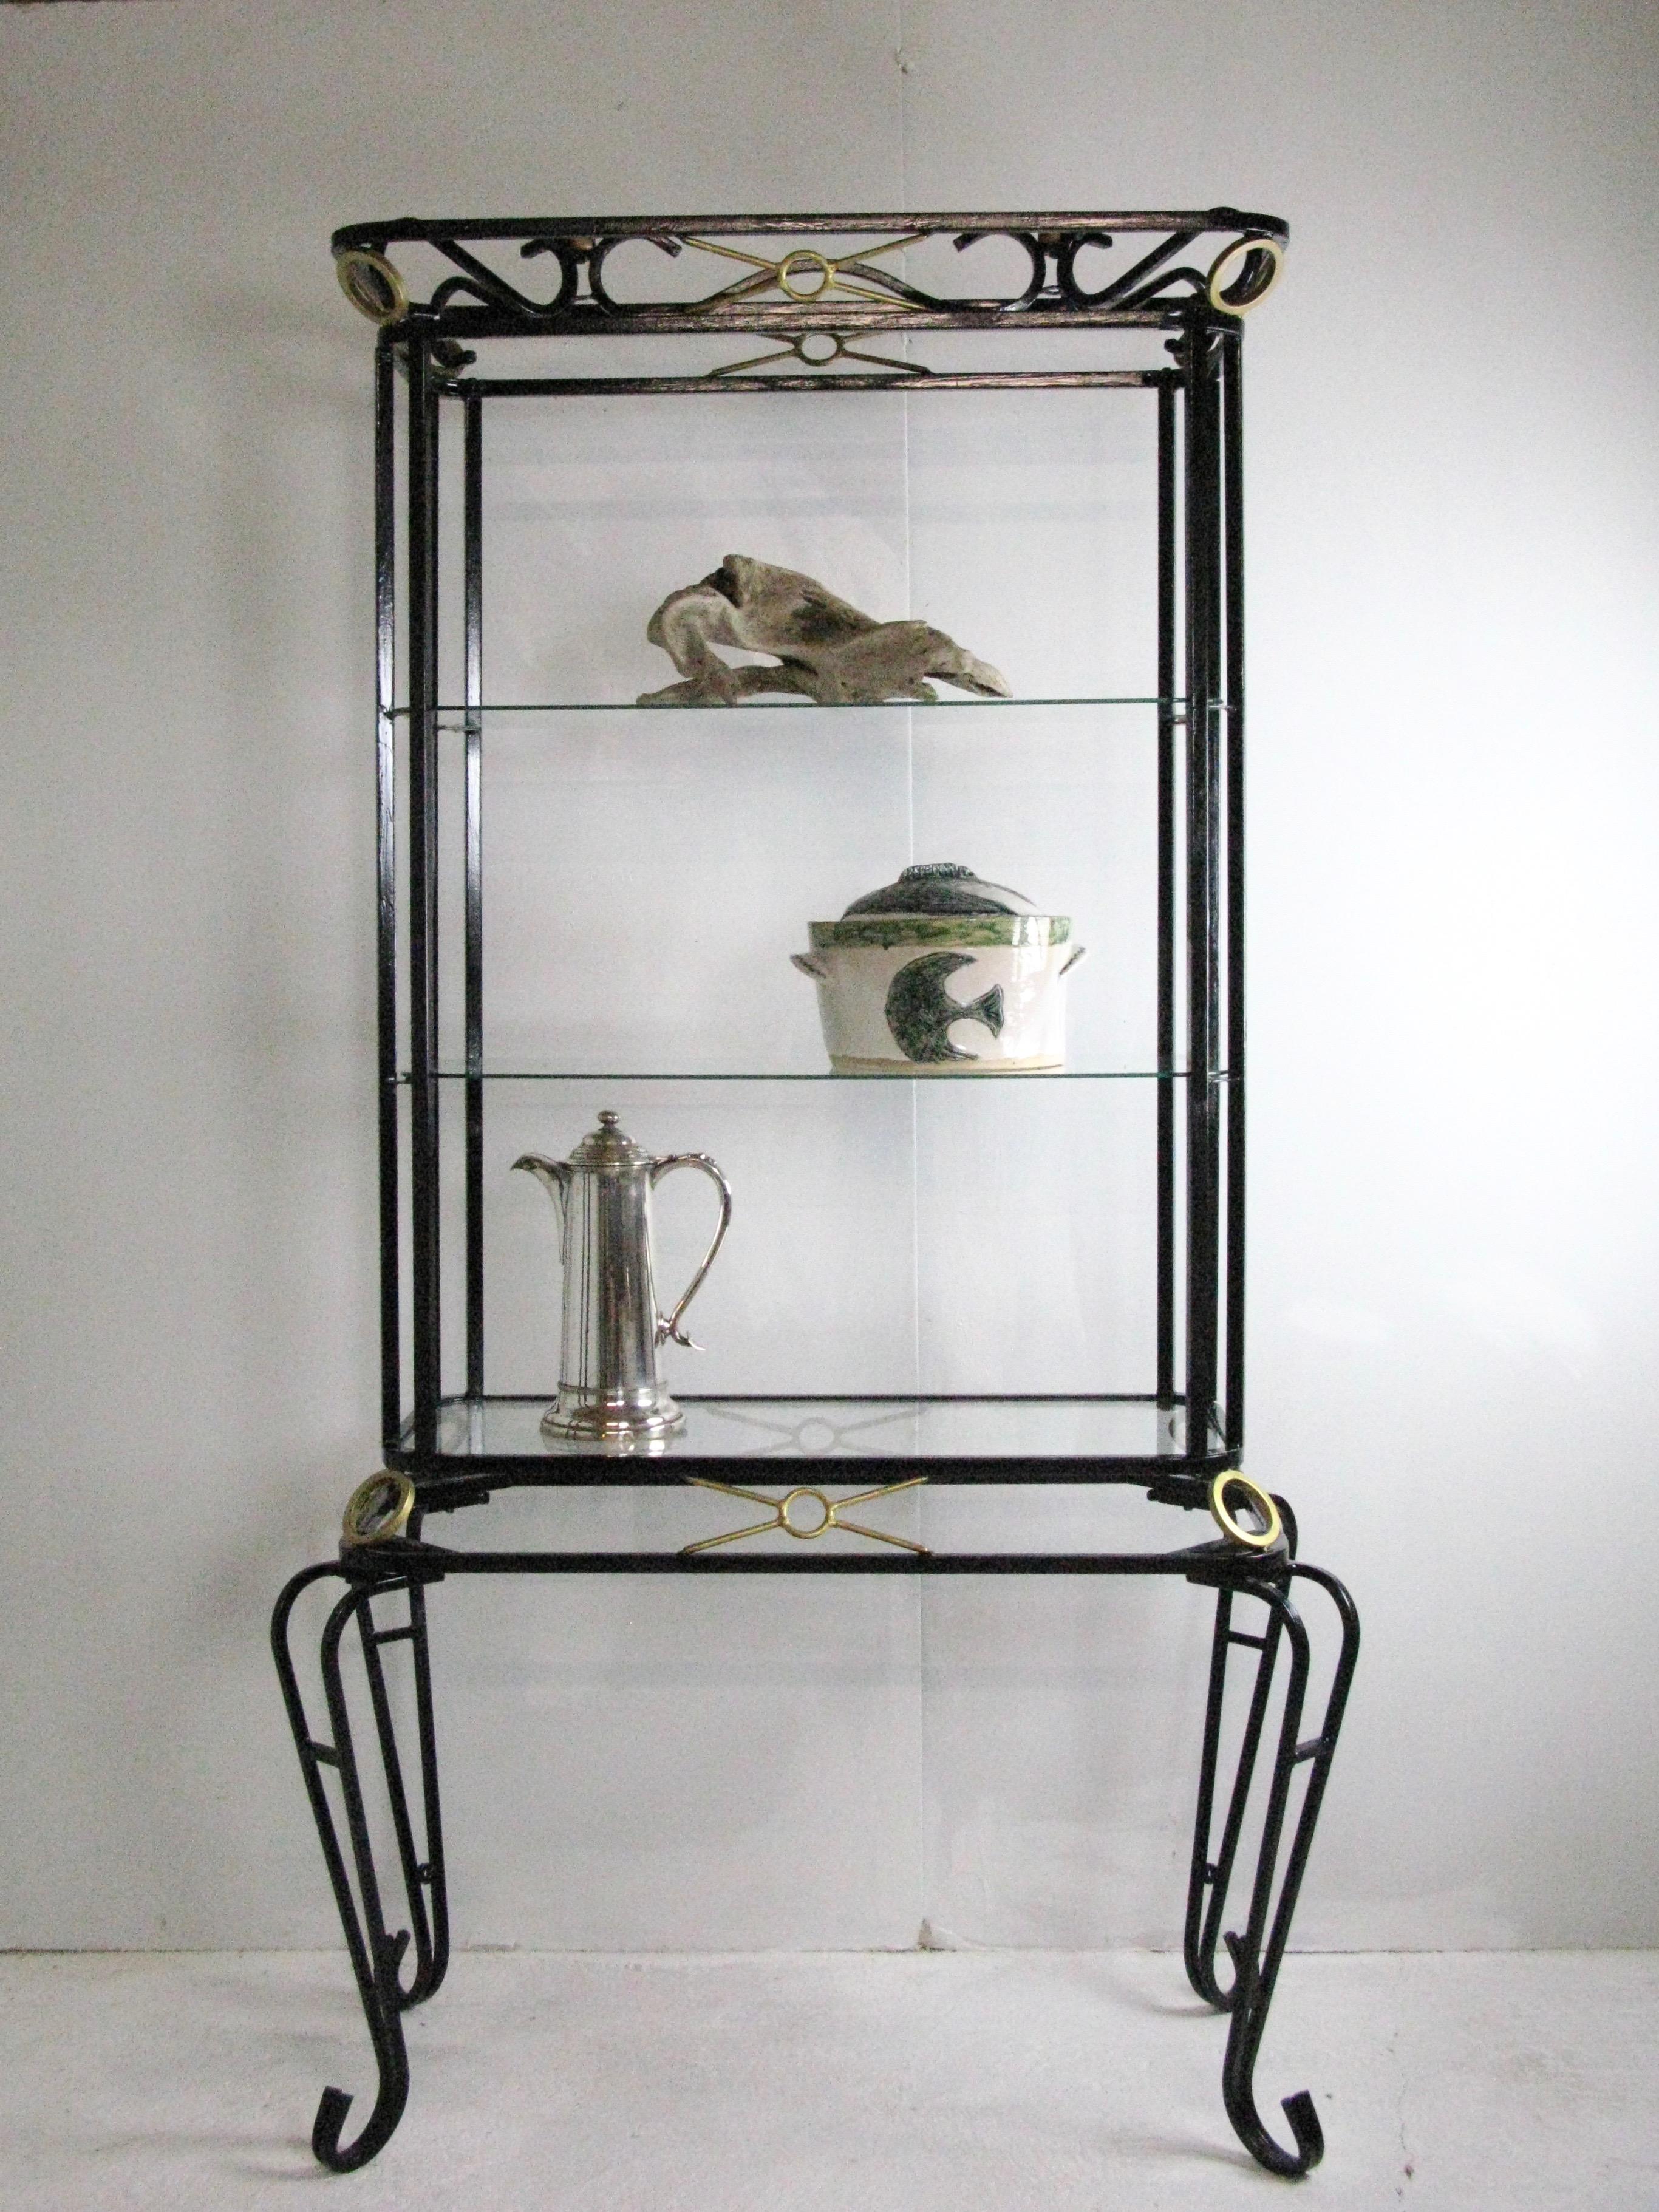 Lovely impressive decorative vintage display cabinet.

With 3 fixed glass shelves
Origin: France
Very nice for display in kitchen, towel rack in bathroom, or for shop or hall display.

Word from the owner
During these uncertain times, we feel